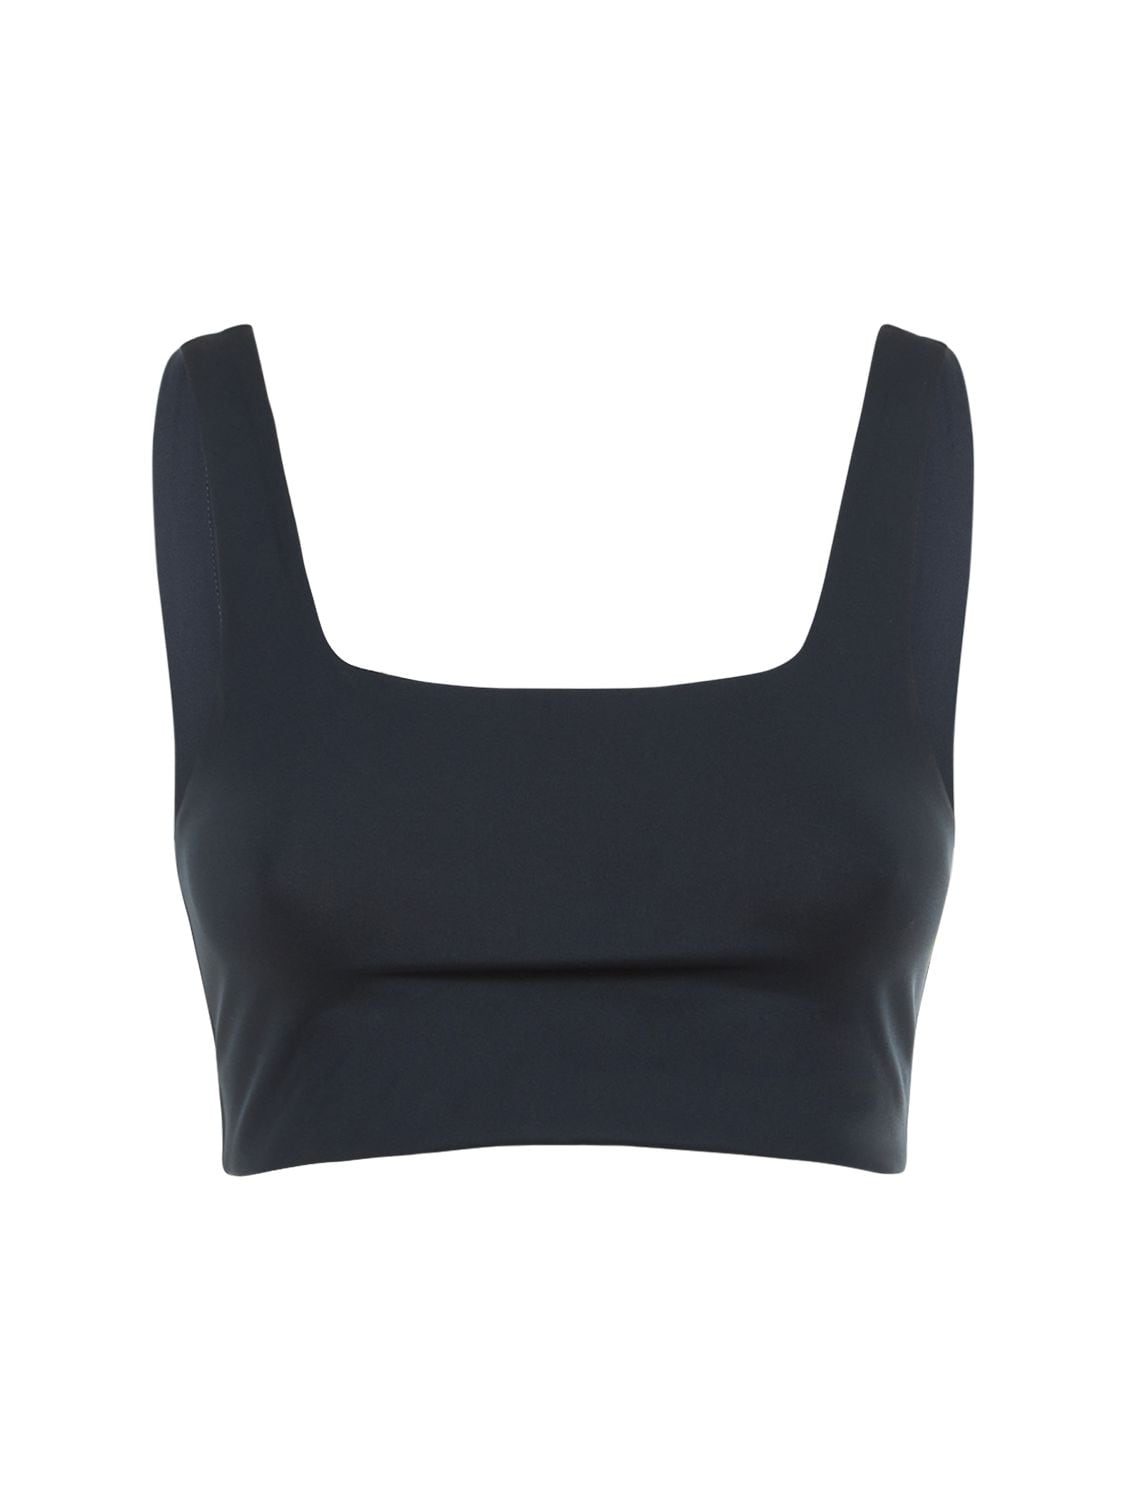 Girlfriend Collective Tommy Stretch Tech Bra Top